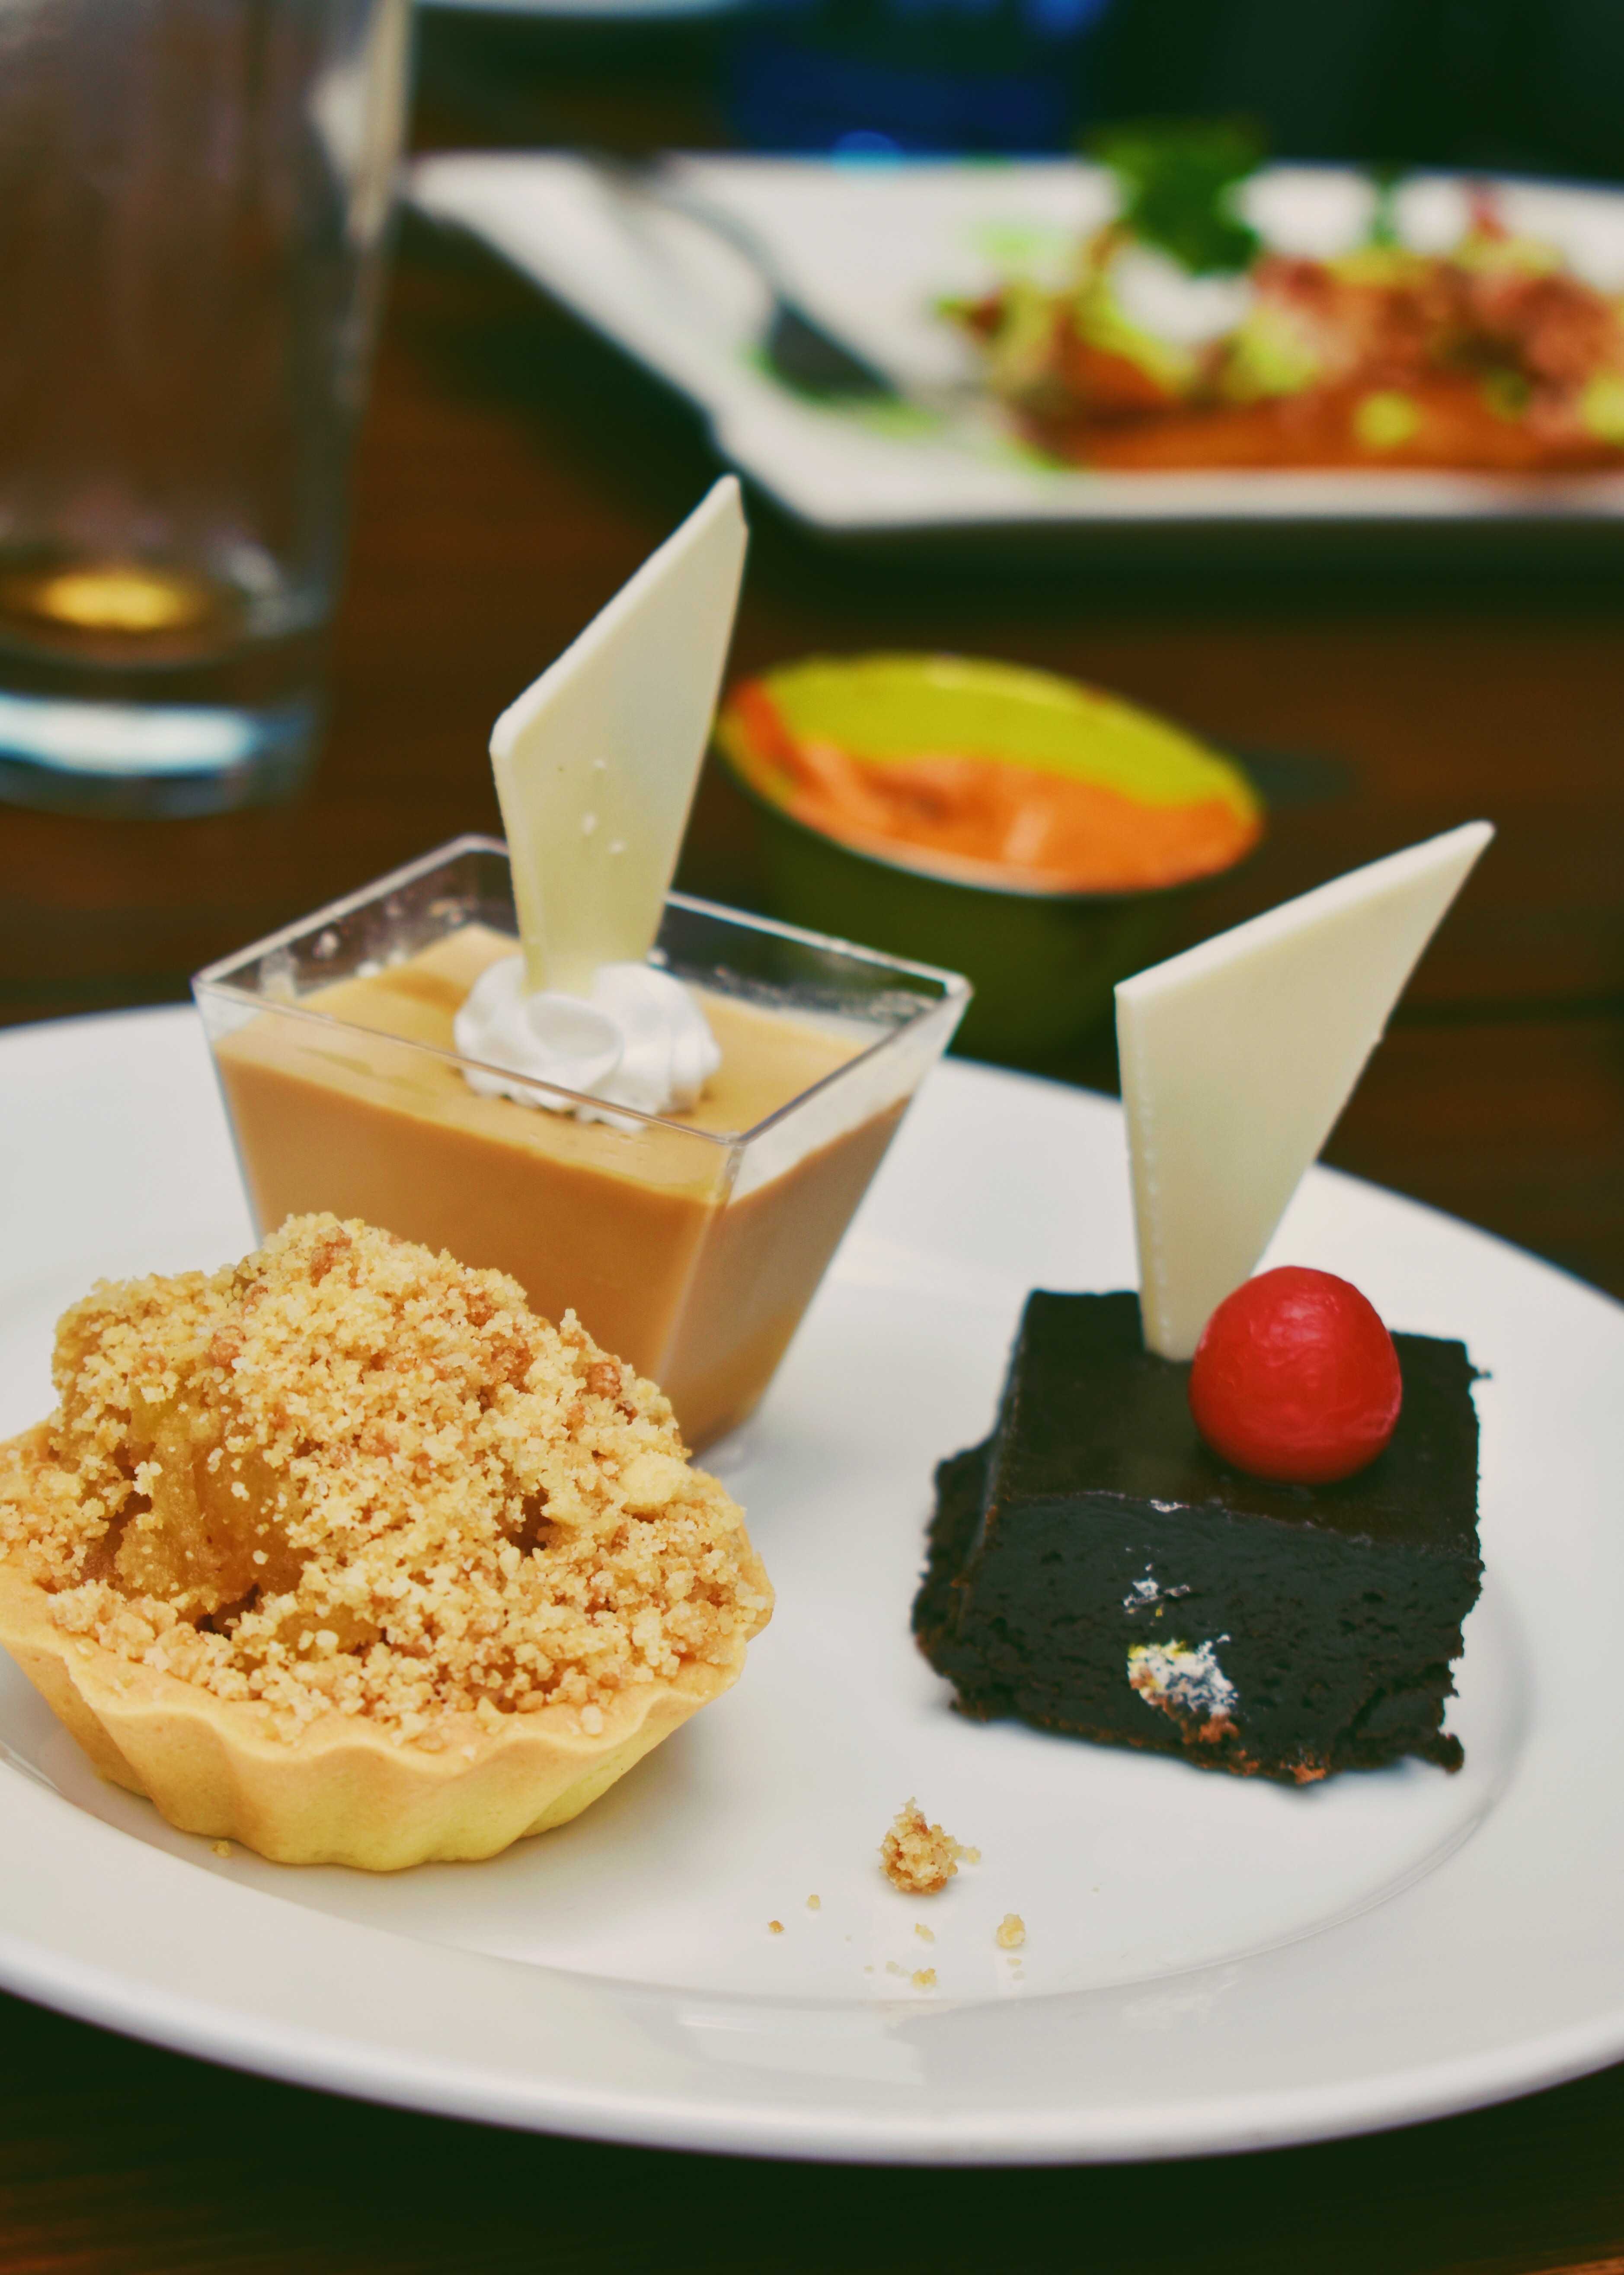 Wide array of desserts